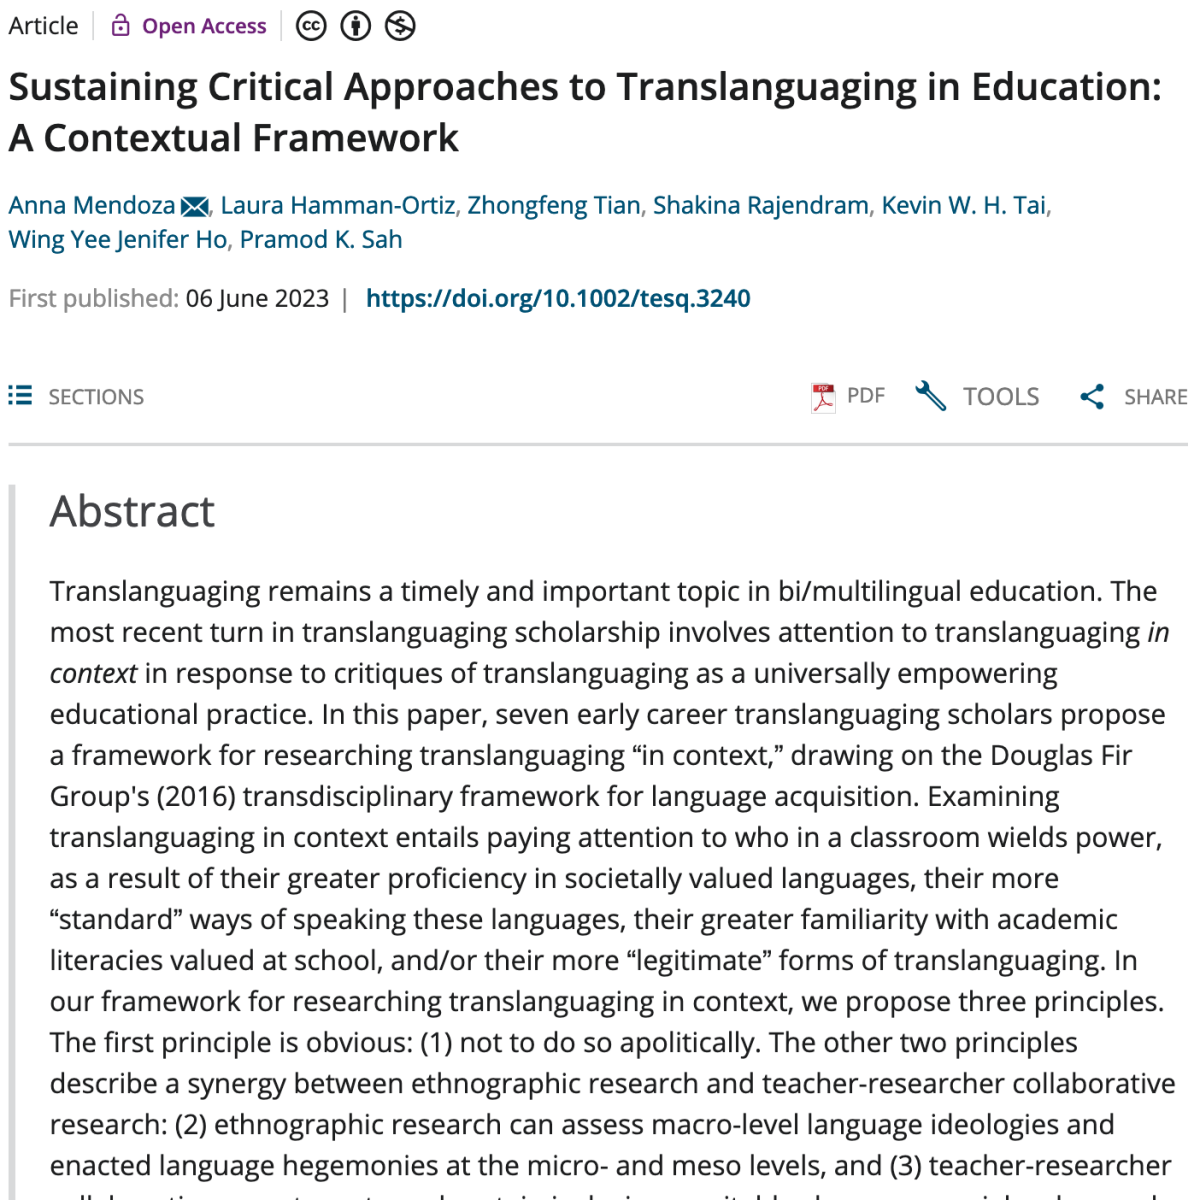 New OPEN ACCESS, state-of-the-art paper on translanguaging just published in TESOL Quarterly, written by emerging scholars